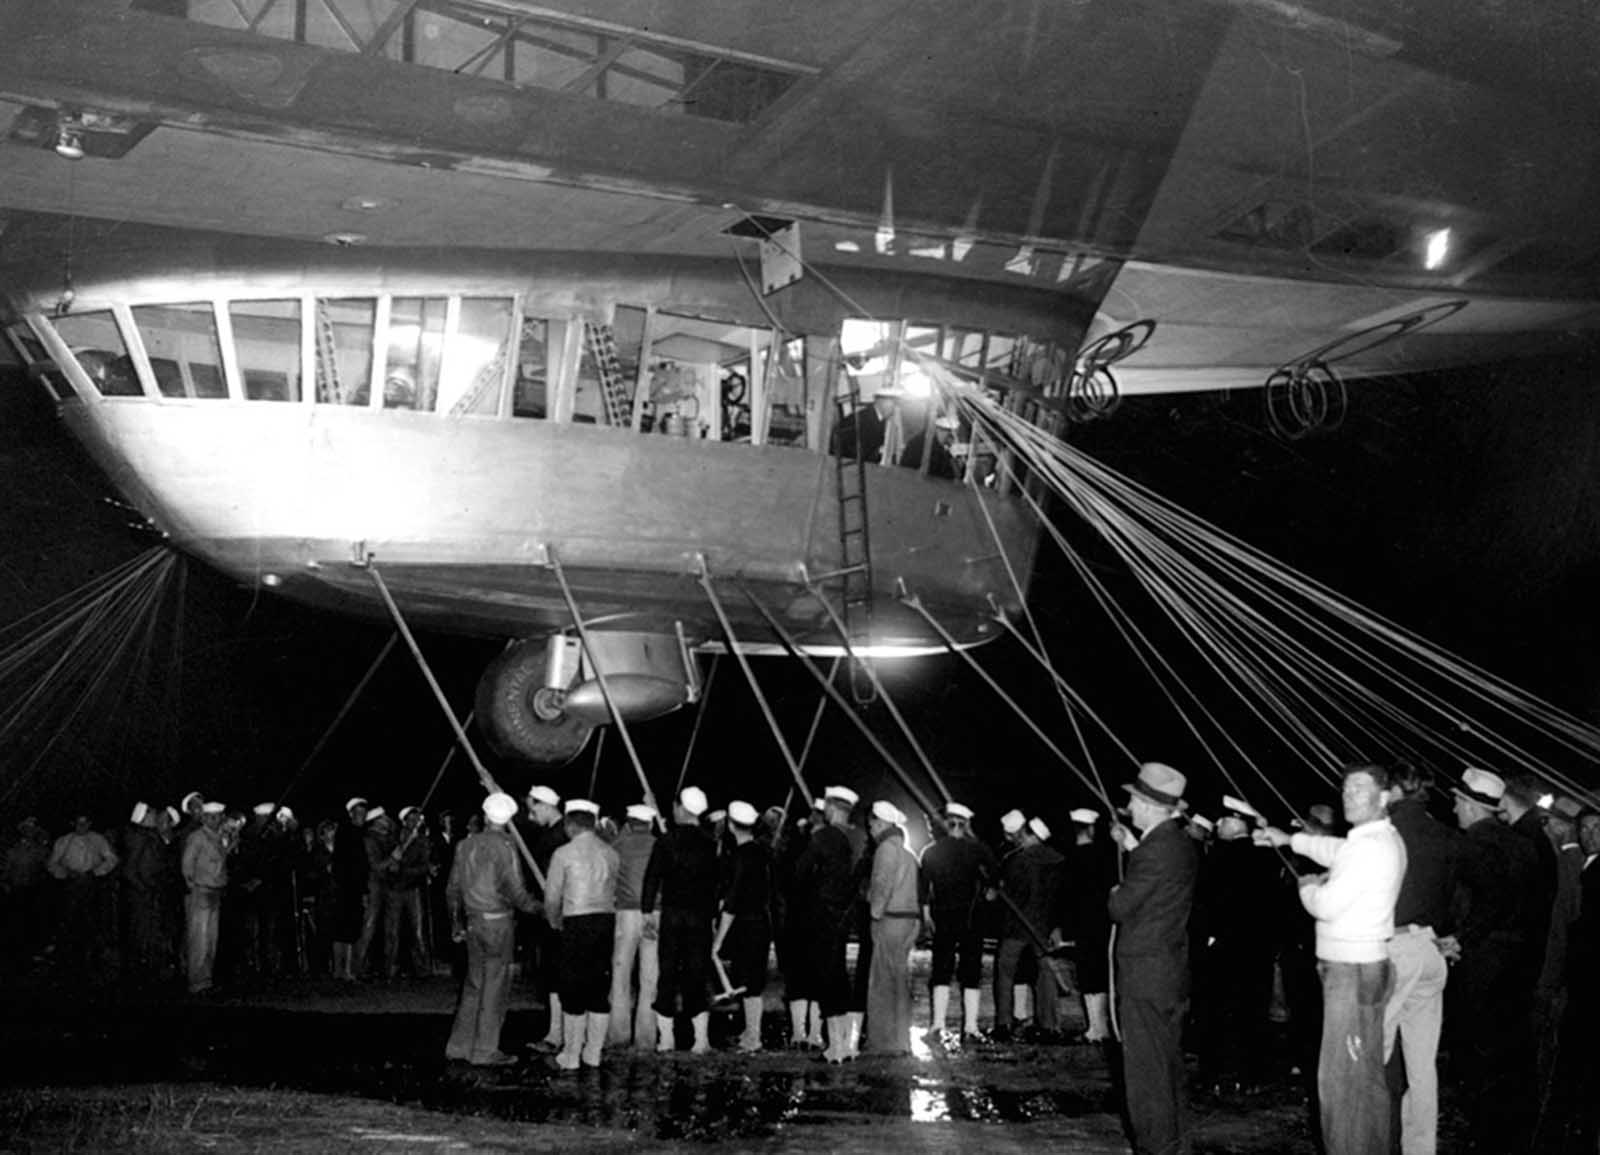 Spectators and ground crew surround the gondola of the Hindenburg as the lighter-than-air ship prepares to depart the U.S. Naval Station at Lakehurst, New Jersey, on May 11, 1936, on a return trip to Germany.